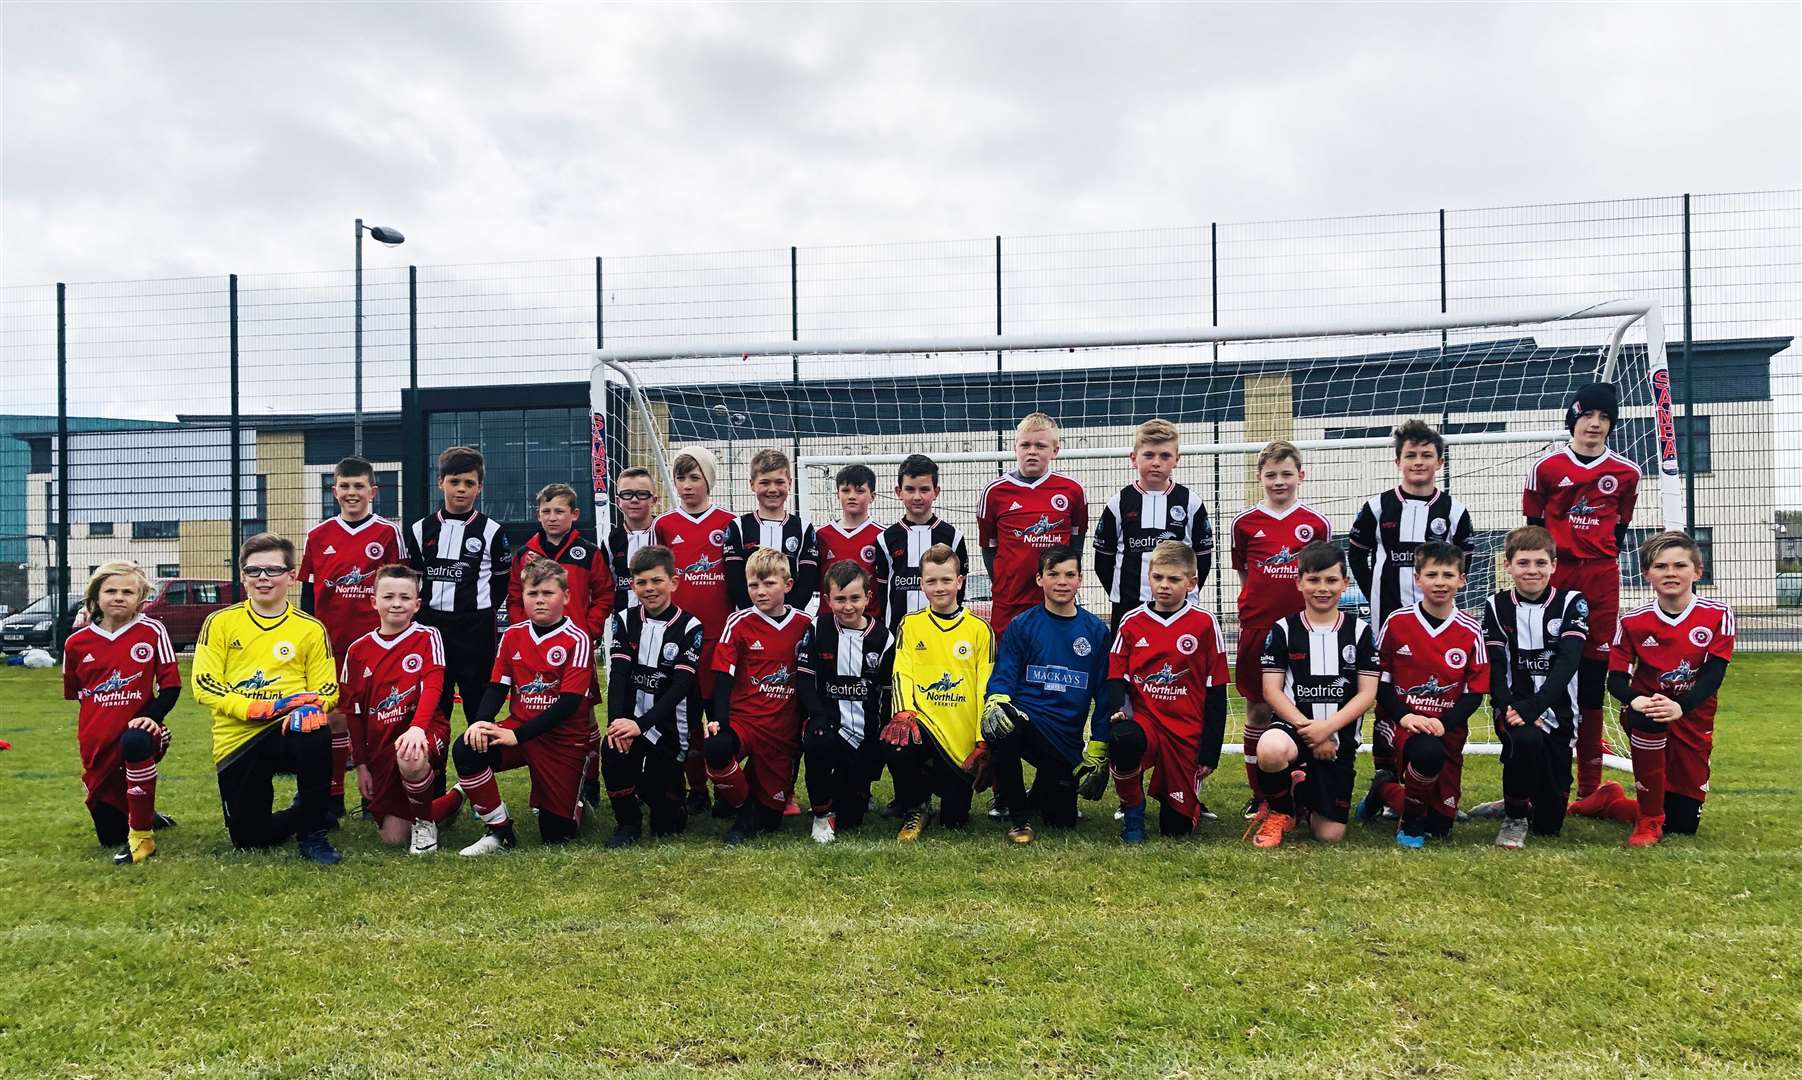 The U12 squads, featuring all the Caithness and Orkney players who took part.